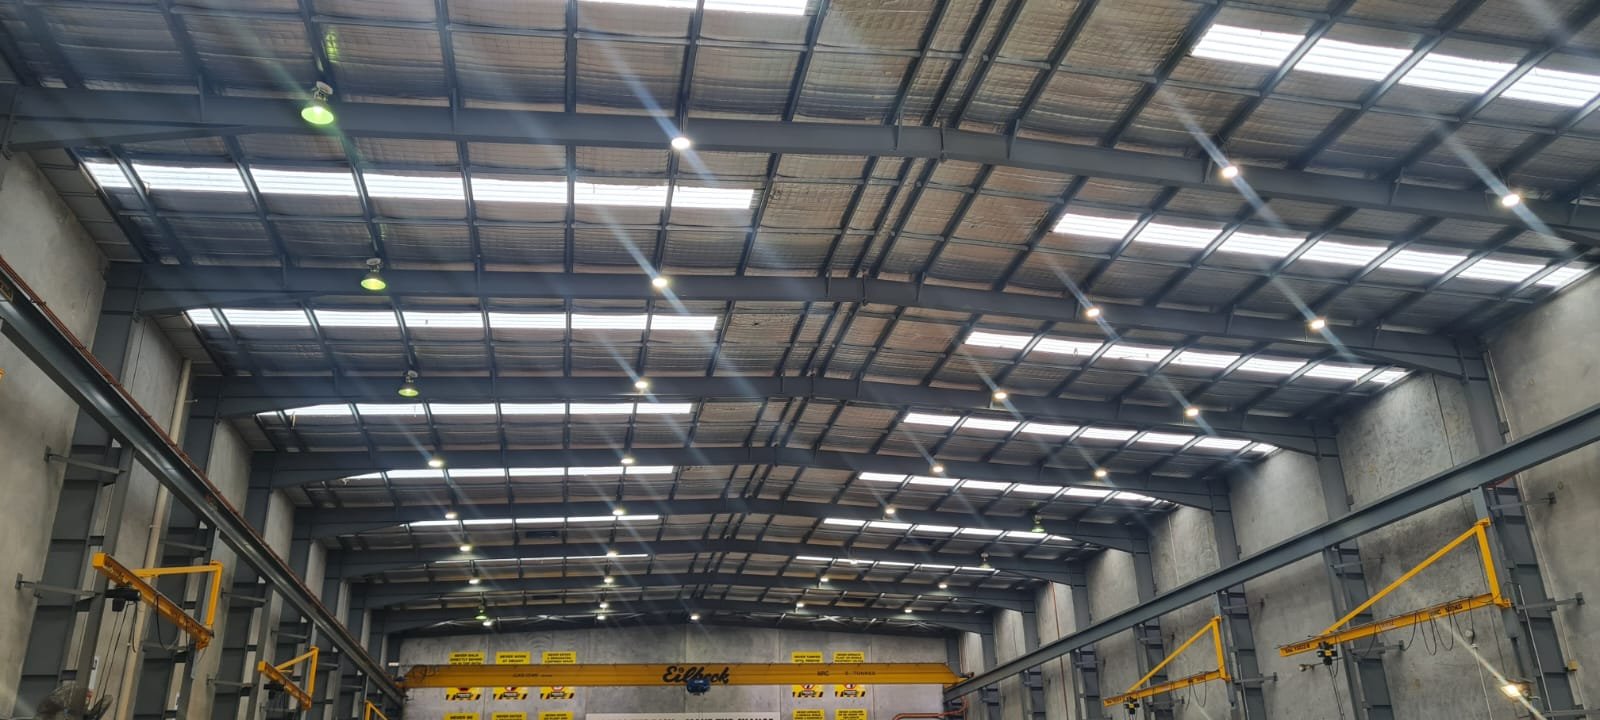 Skylight Replacement of Warehouse 